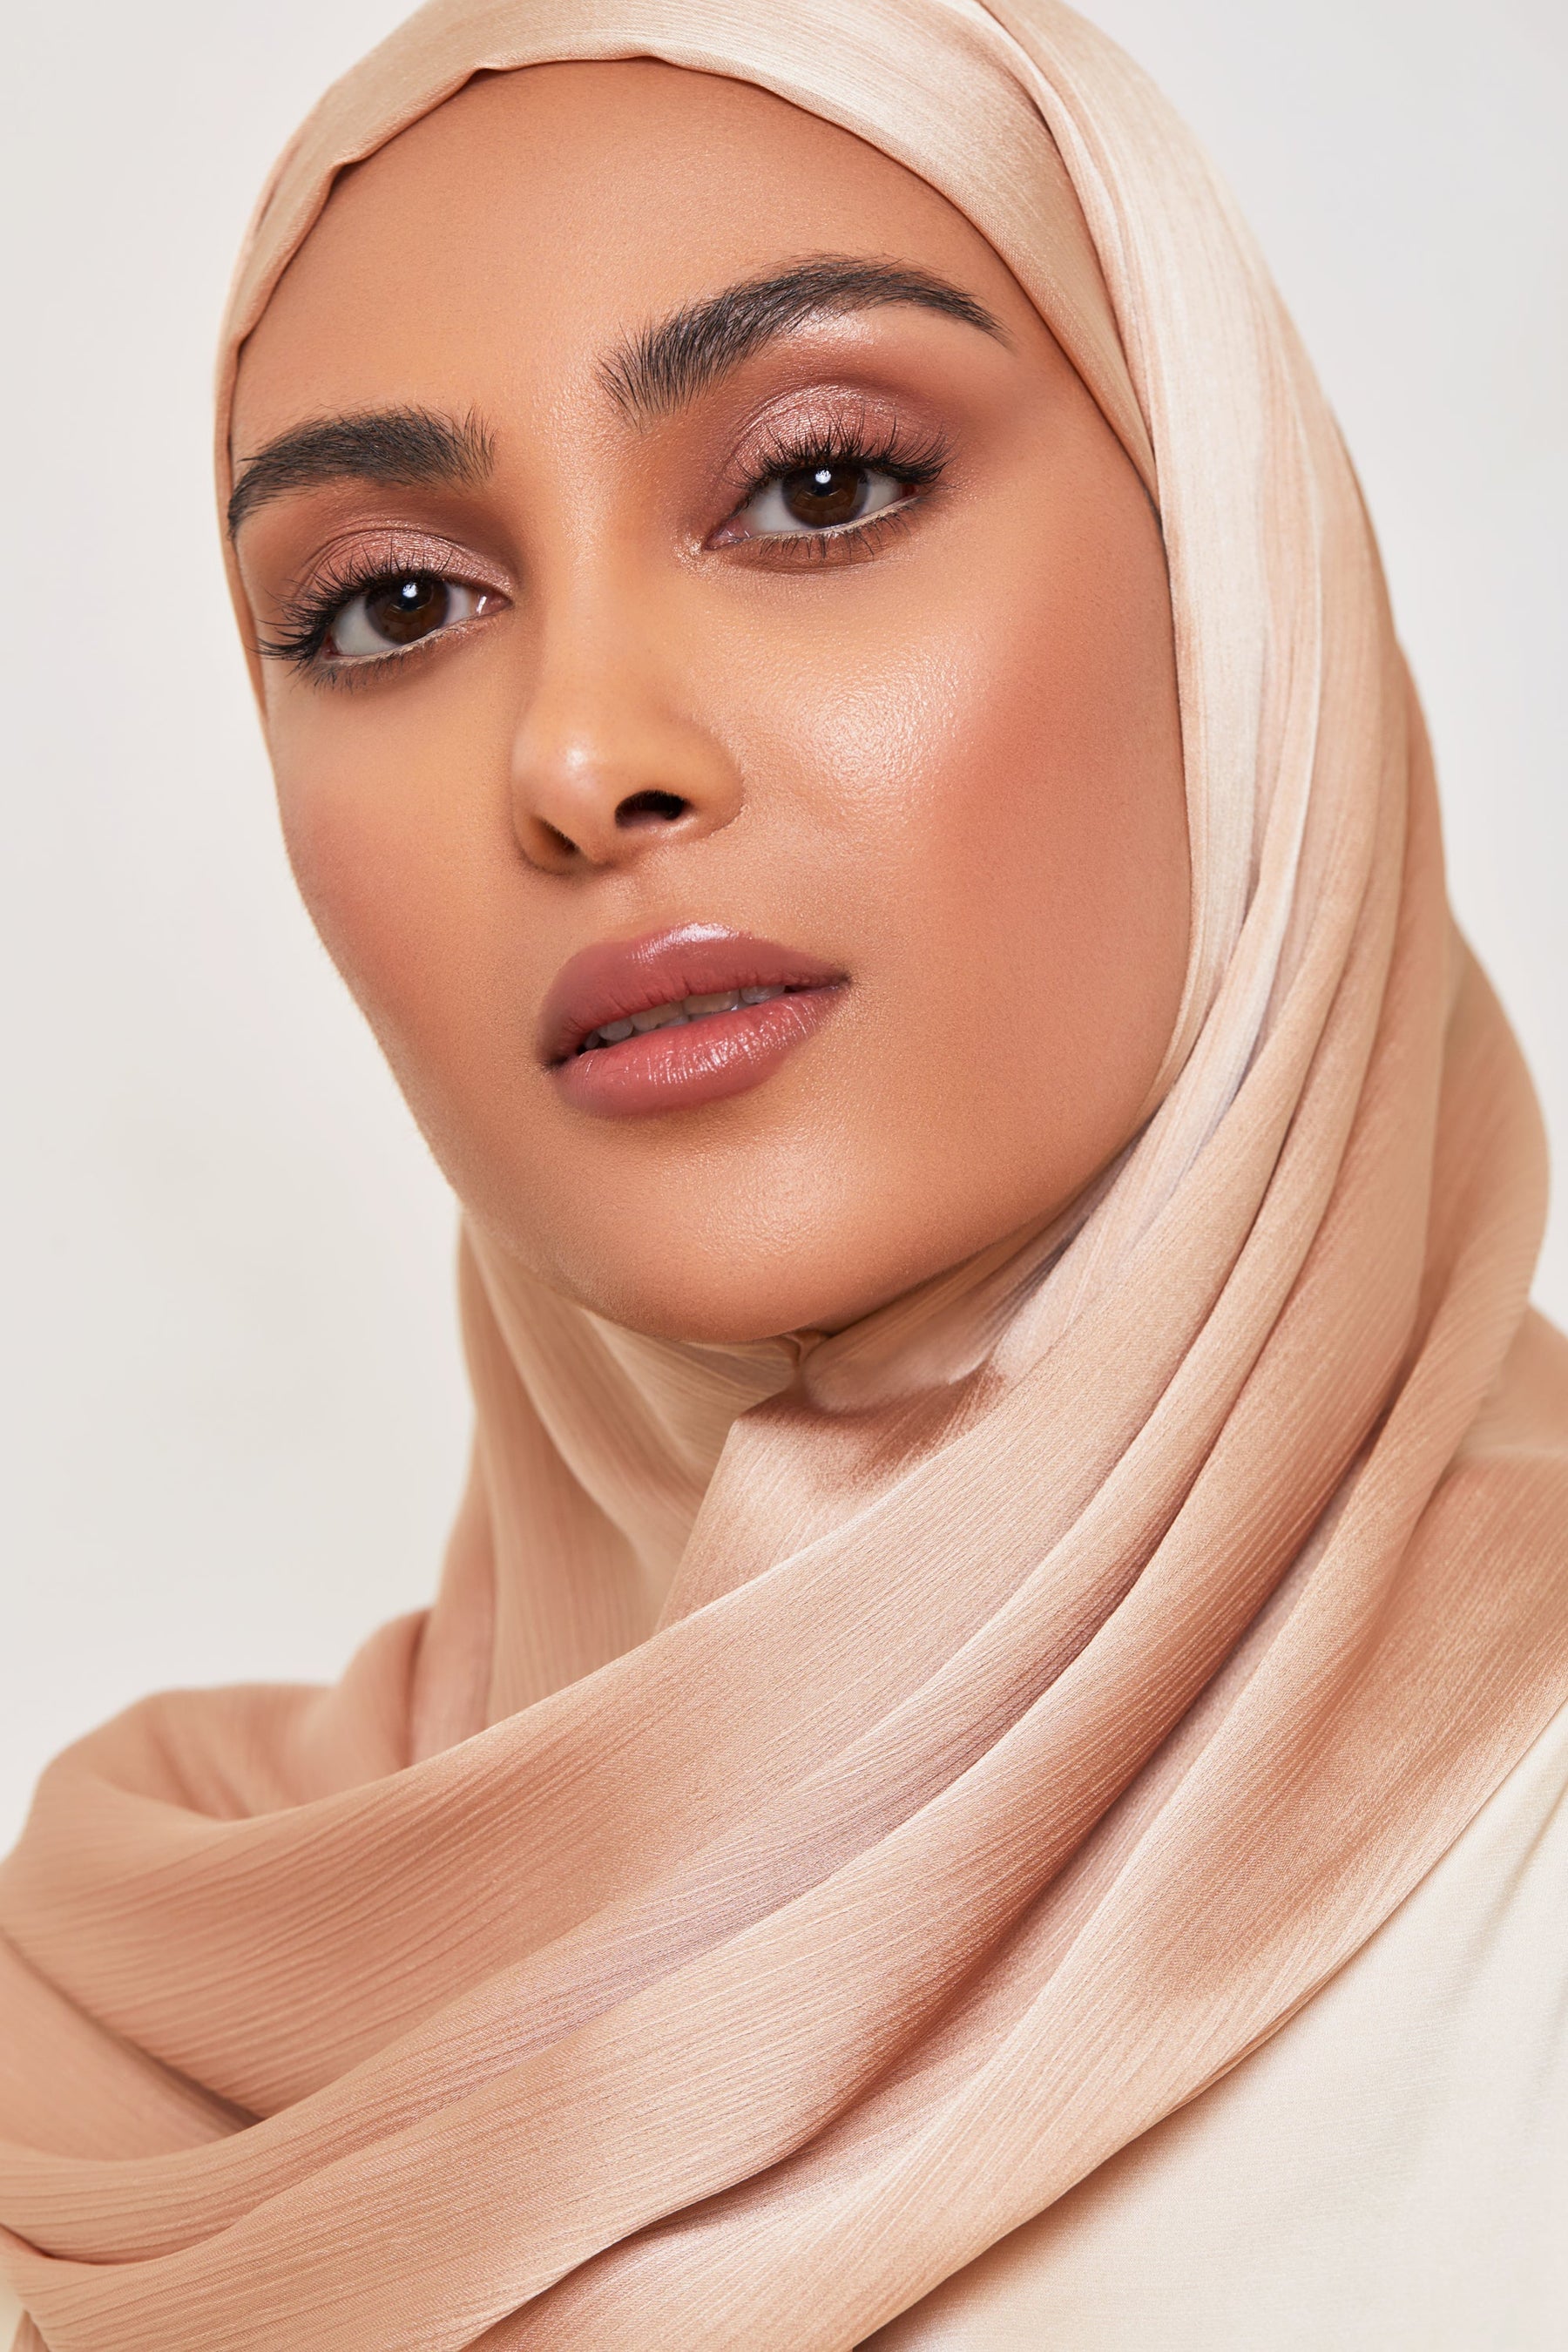 TEXTURE Satin Crepe Hijab - Ginger Crepe Veiled Collection 